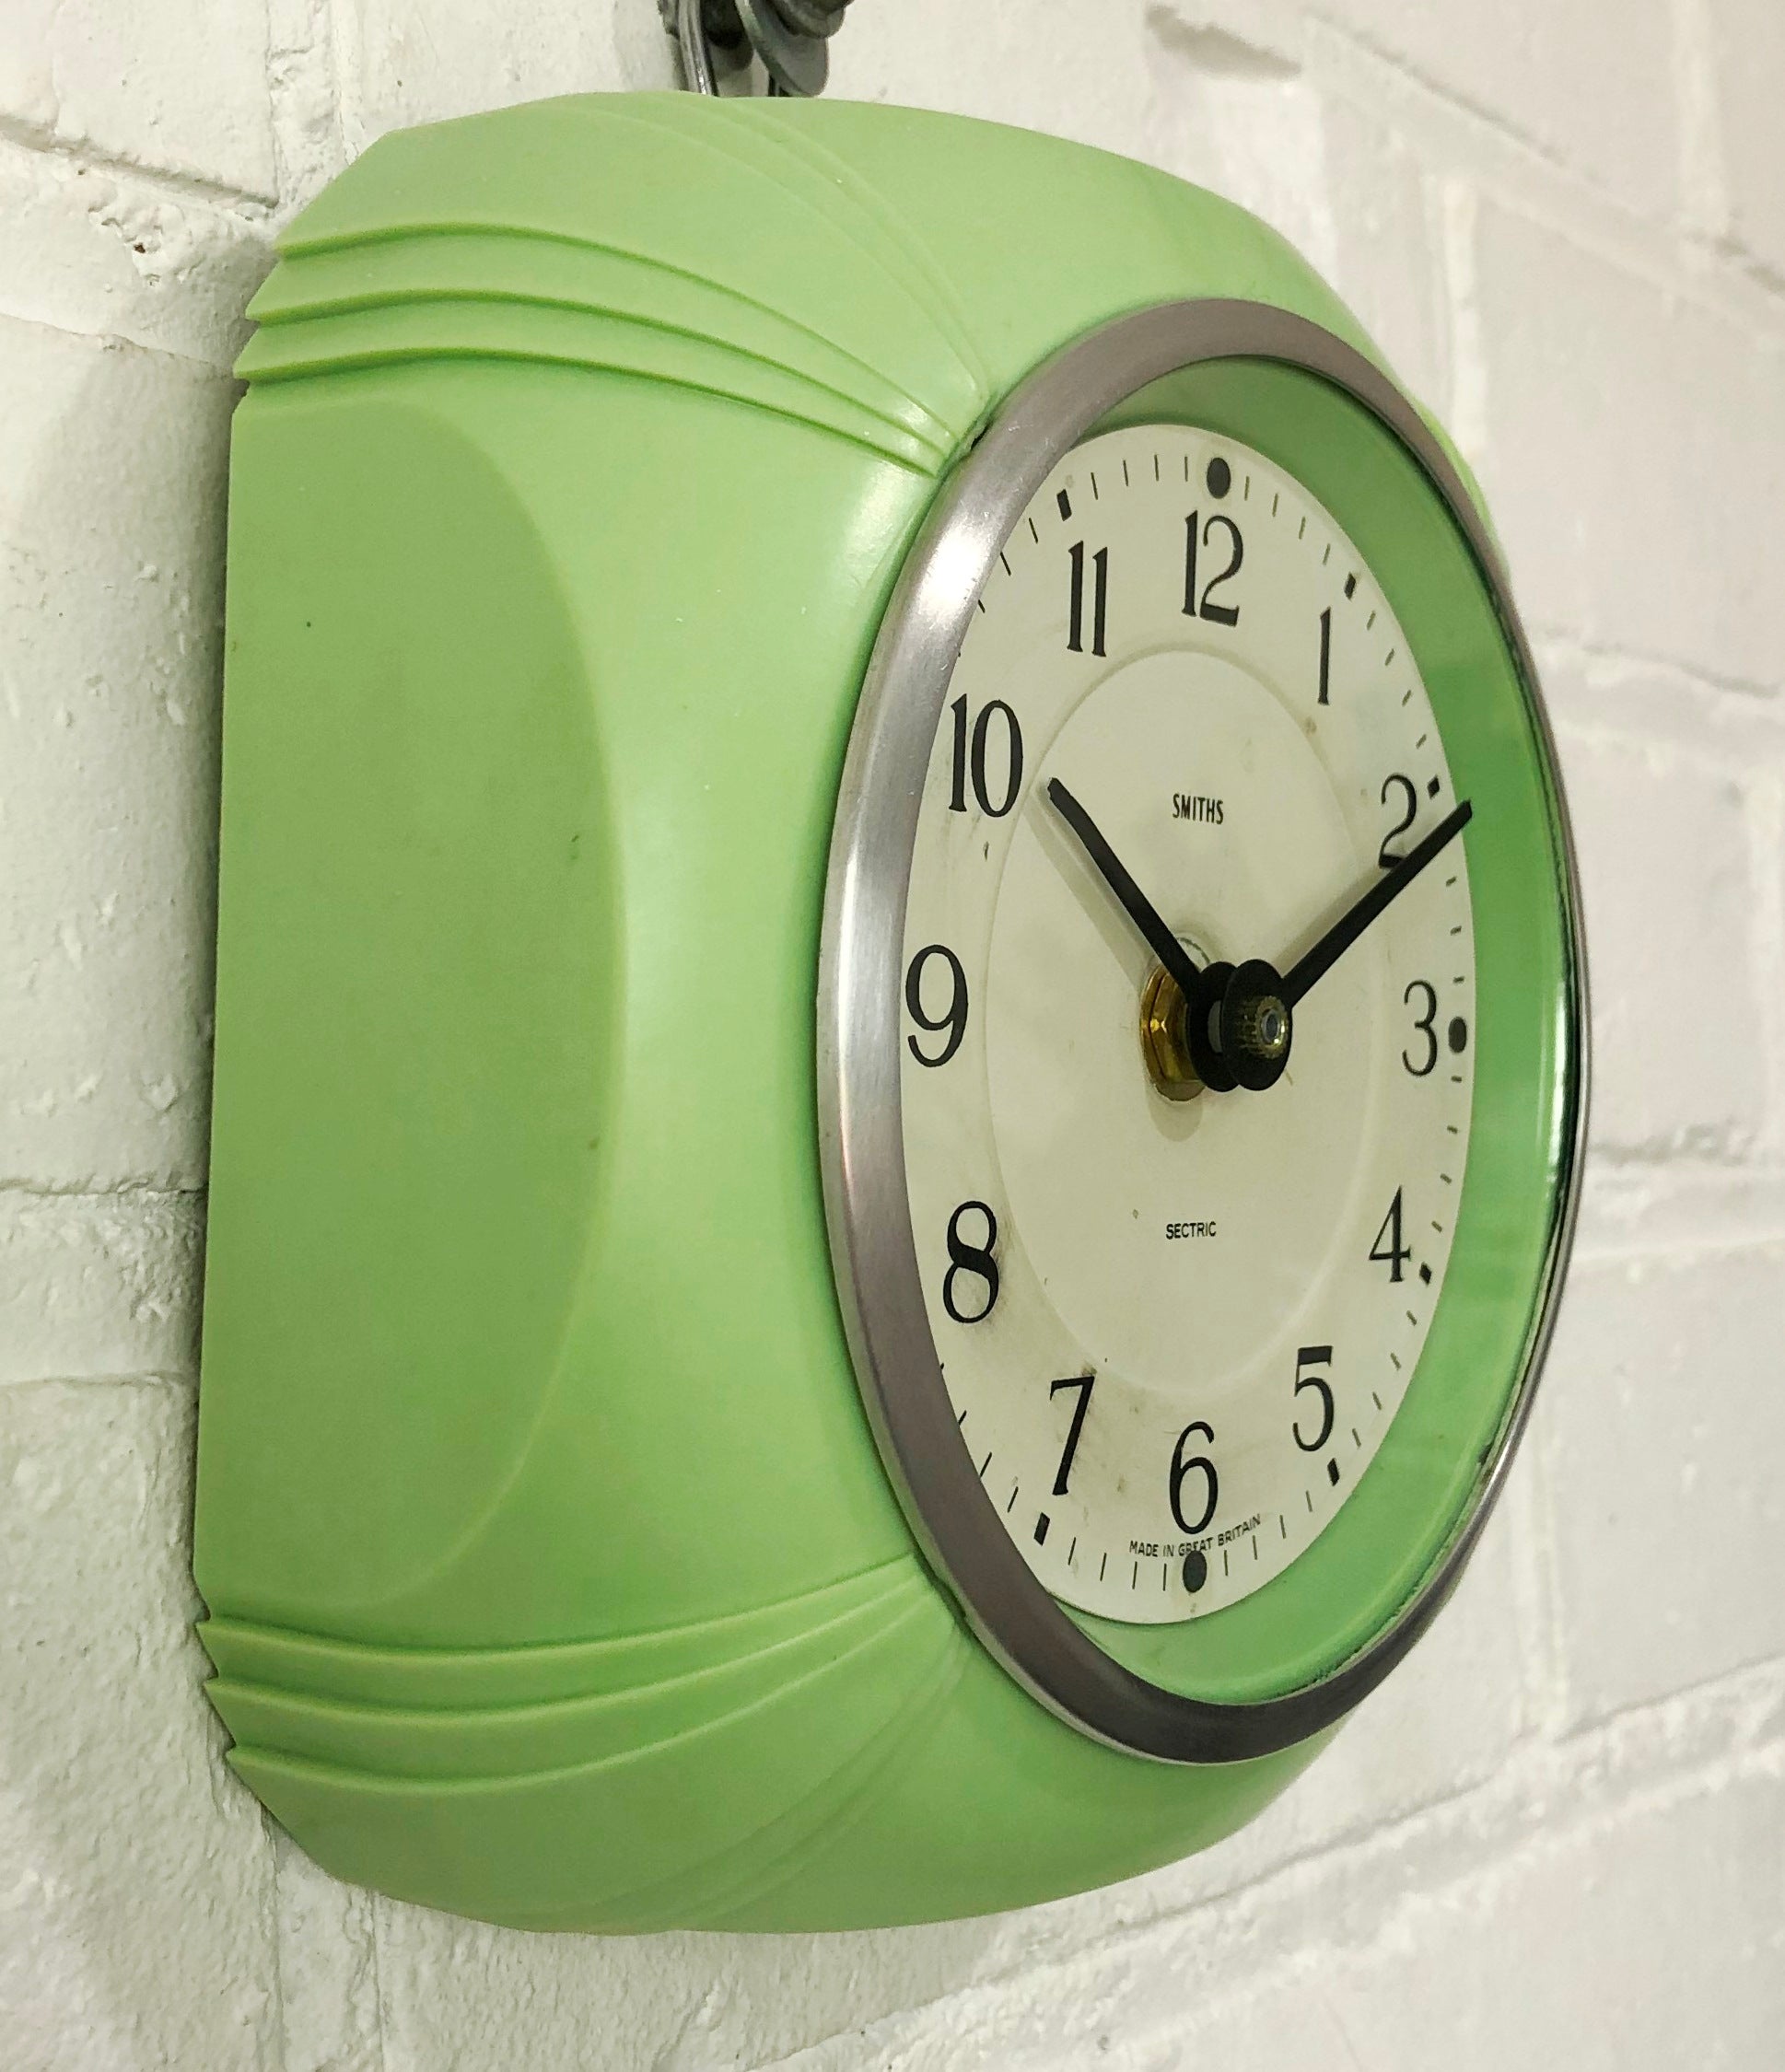 Vintage SMITHS Sectric Bakelite Battery Wall Clock | eXibit collection